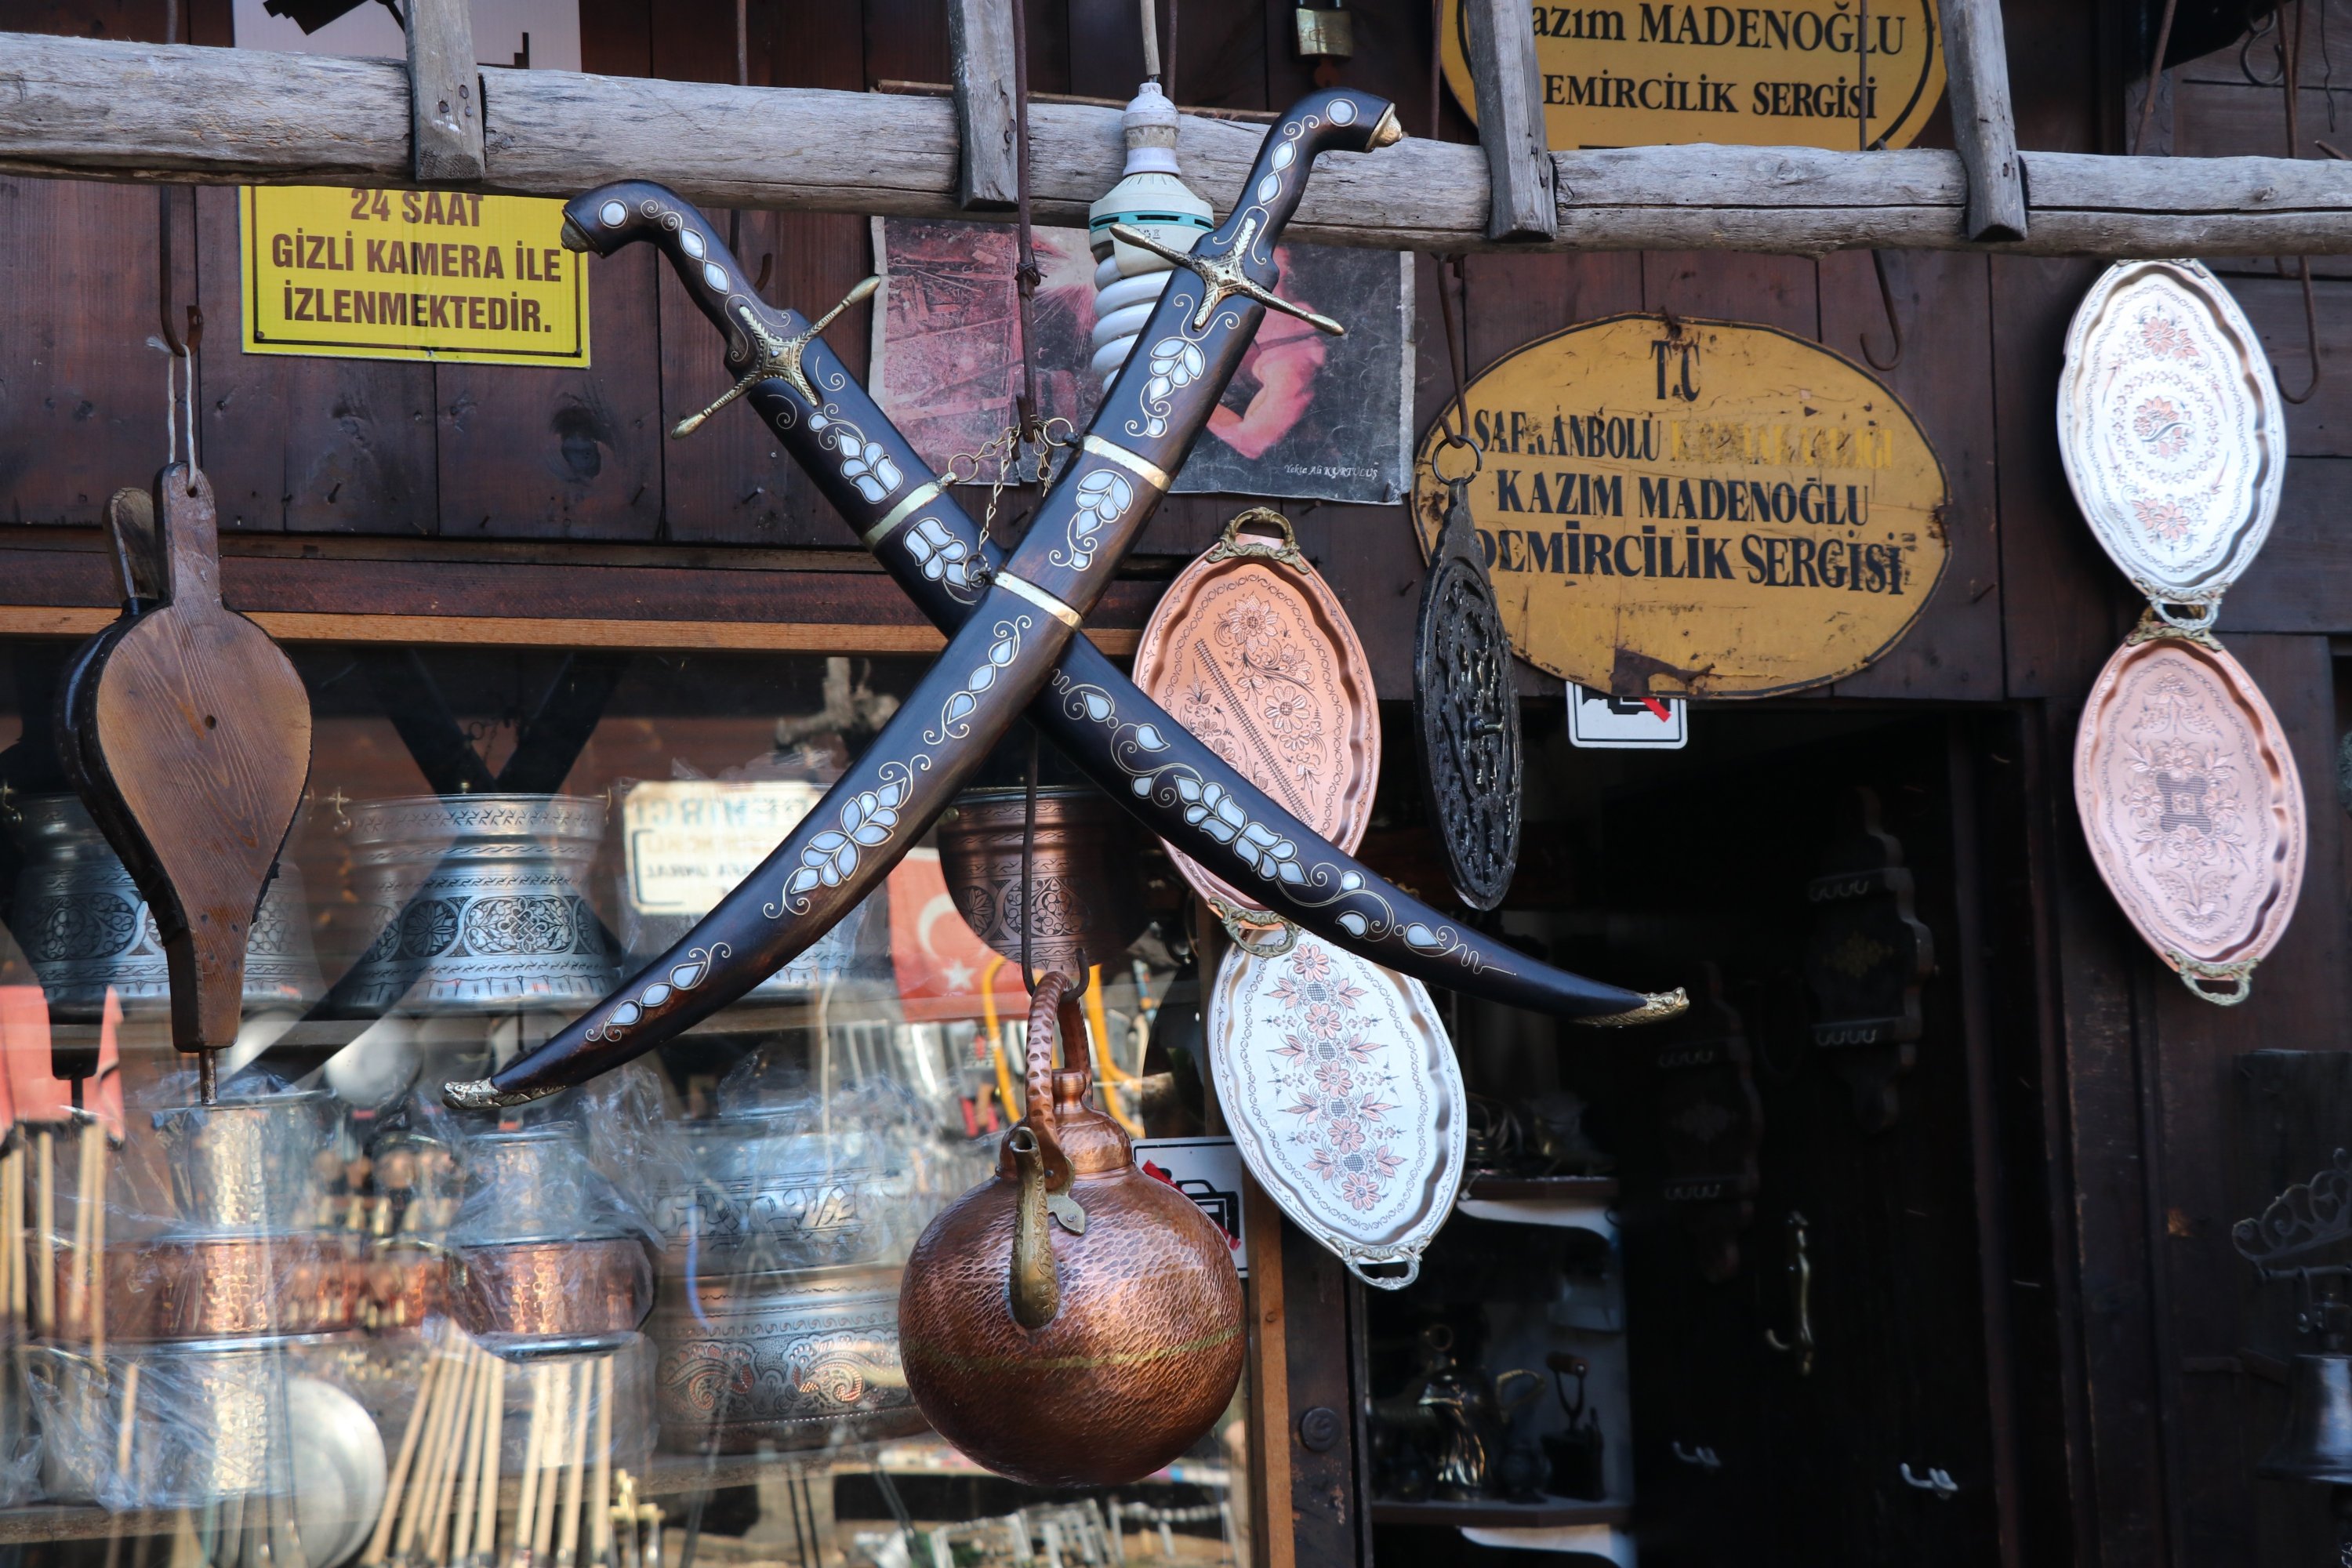 Two swords are displayed at one of the workshops at the Blacksmiths Market in the Safranbolu district of Karabük, northern Turkey, Feb. 3, 2021. (IHA Photo)